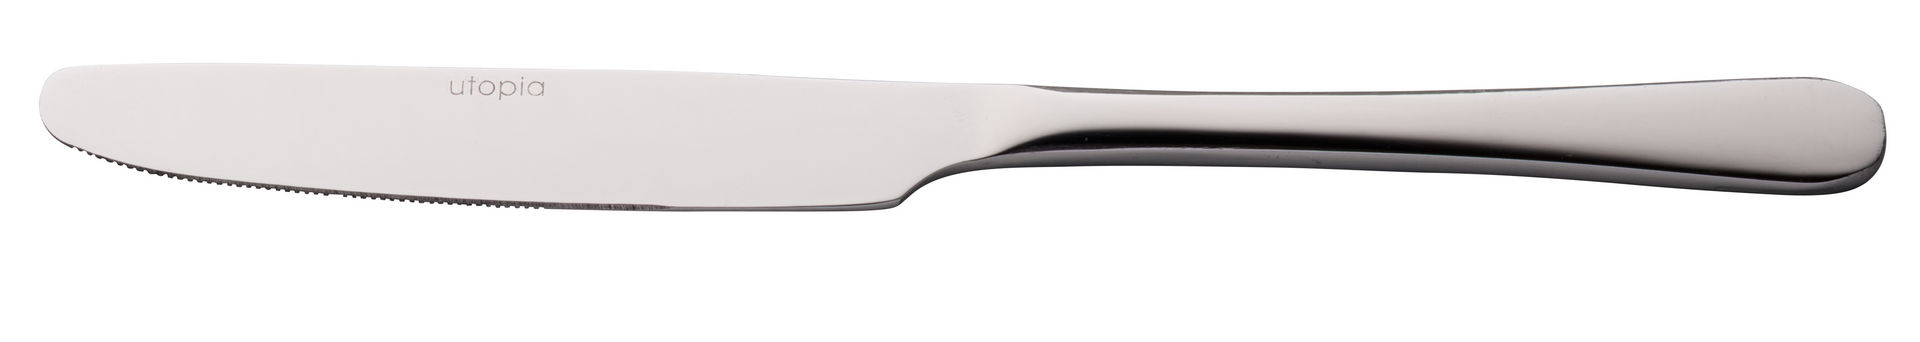 Gourmet Table Knife - F10202-000000-B12240 (Pack of 240)